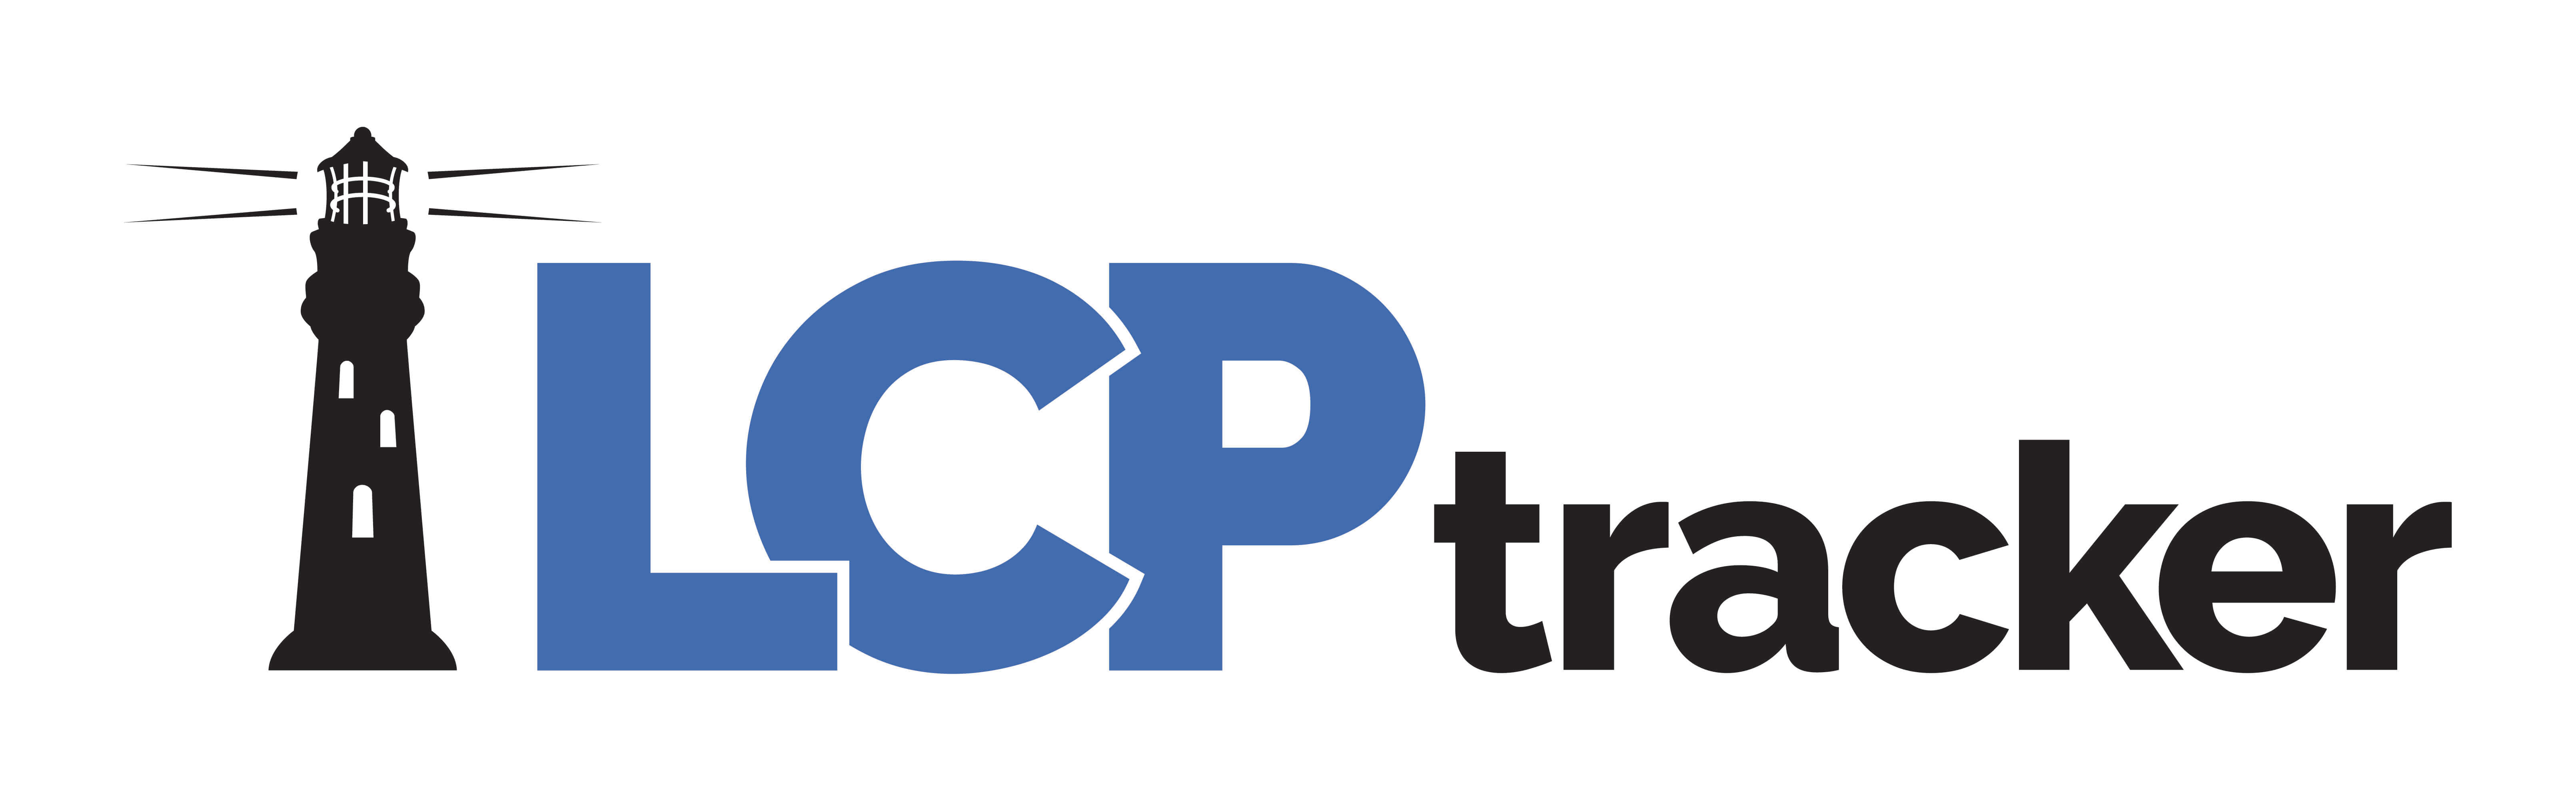 LCPtracker integrated solution with eCMS Cloud-Based ERP